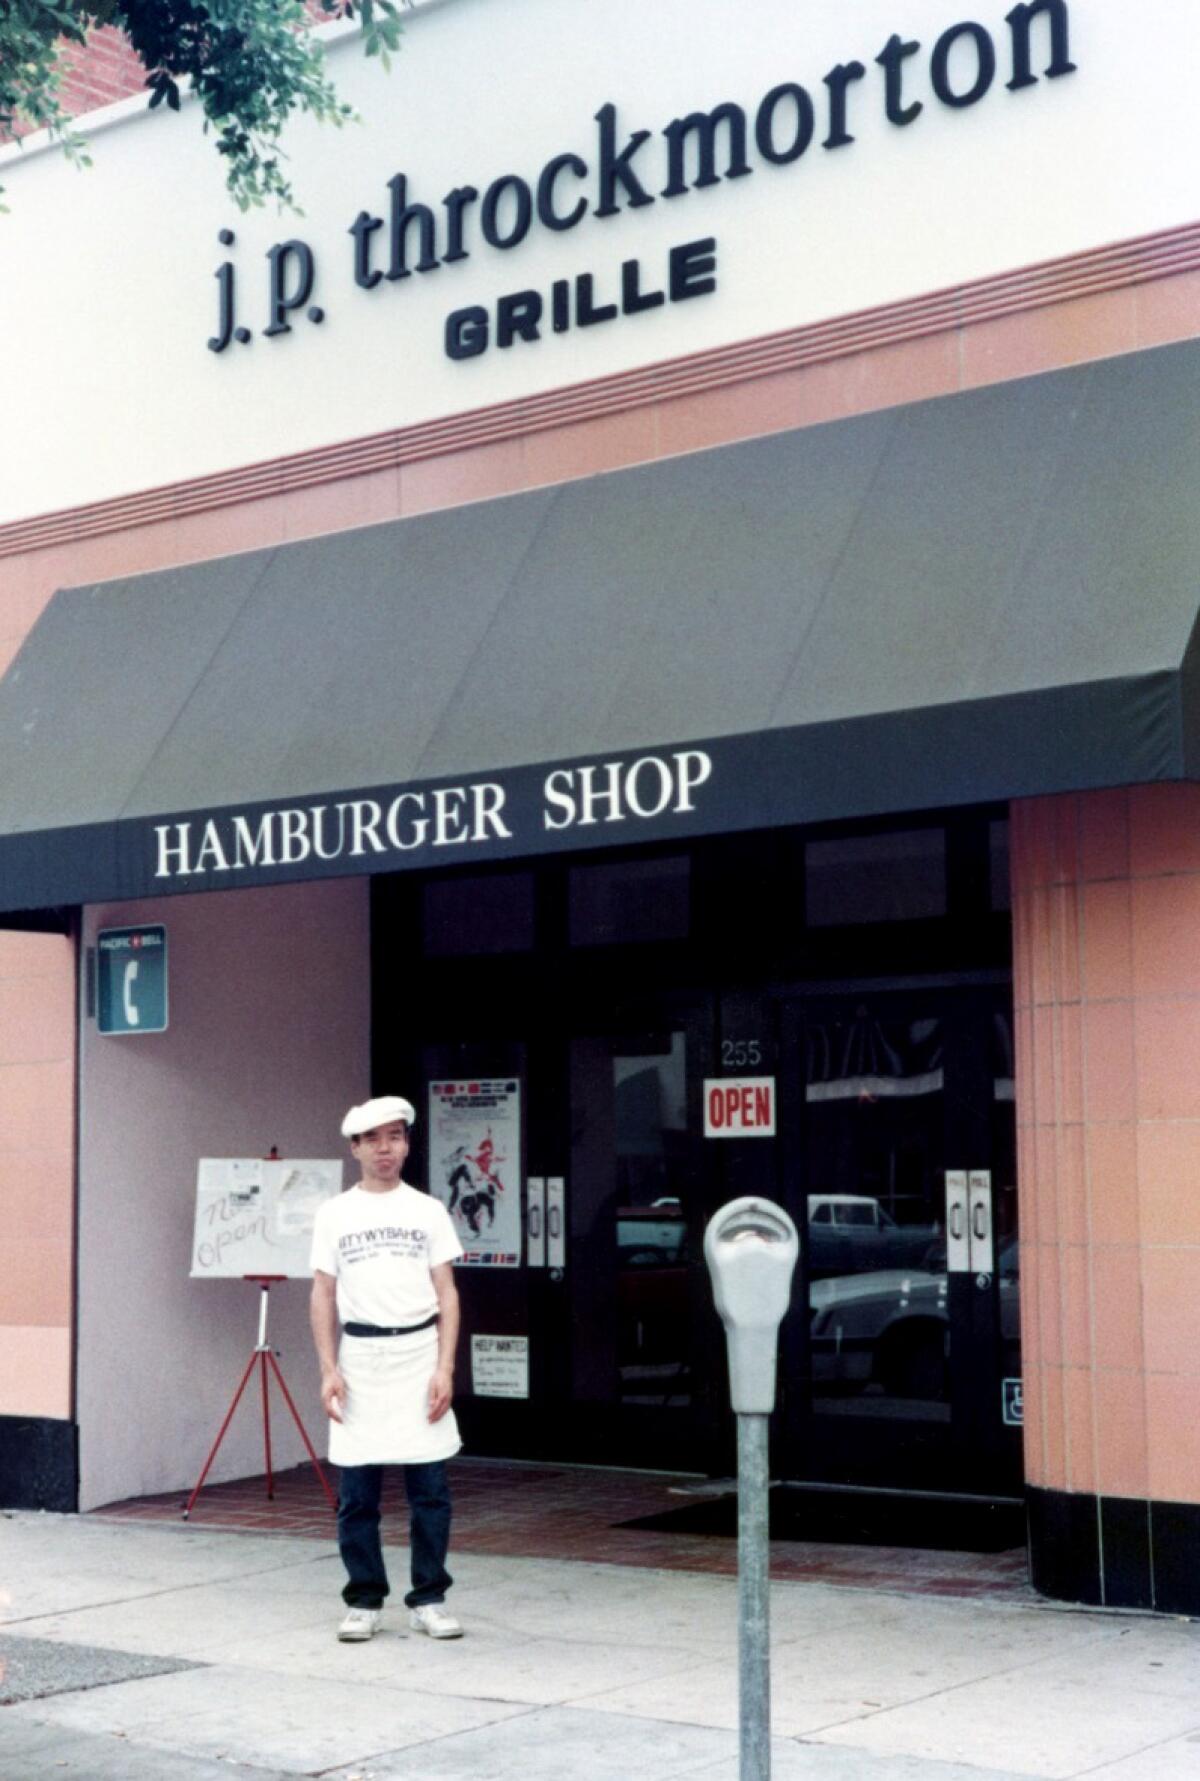 Sadao Nagumo stands outside Jeremiah P. Throckmorton Grille in Beverly Hills in 1989.